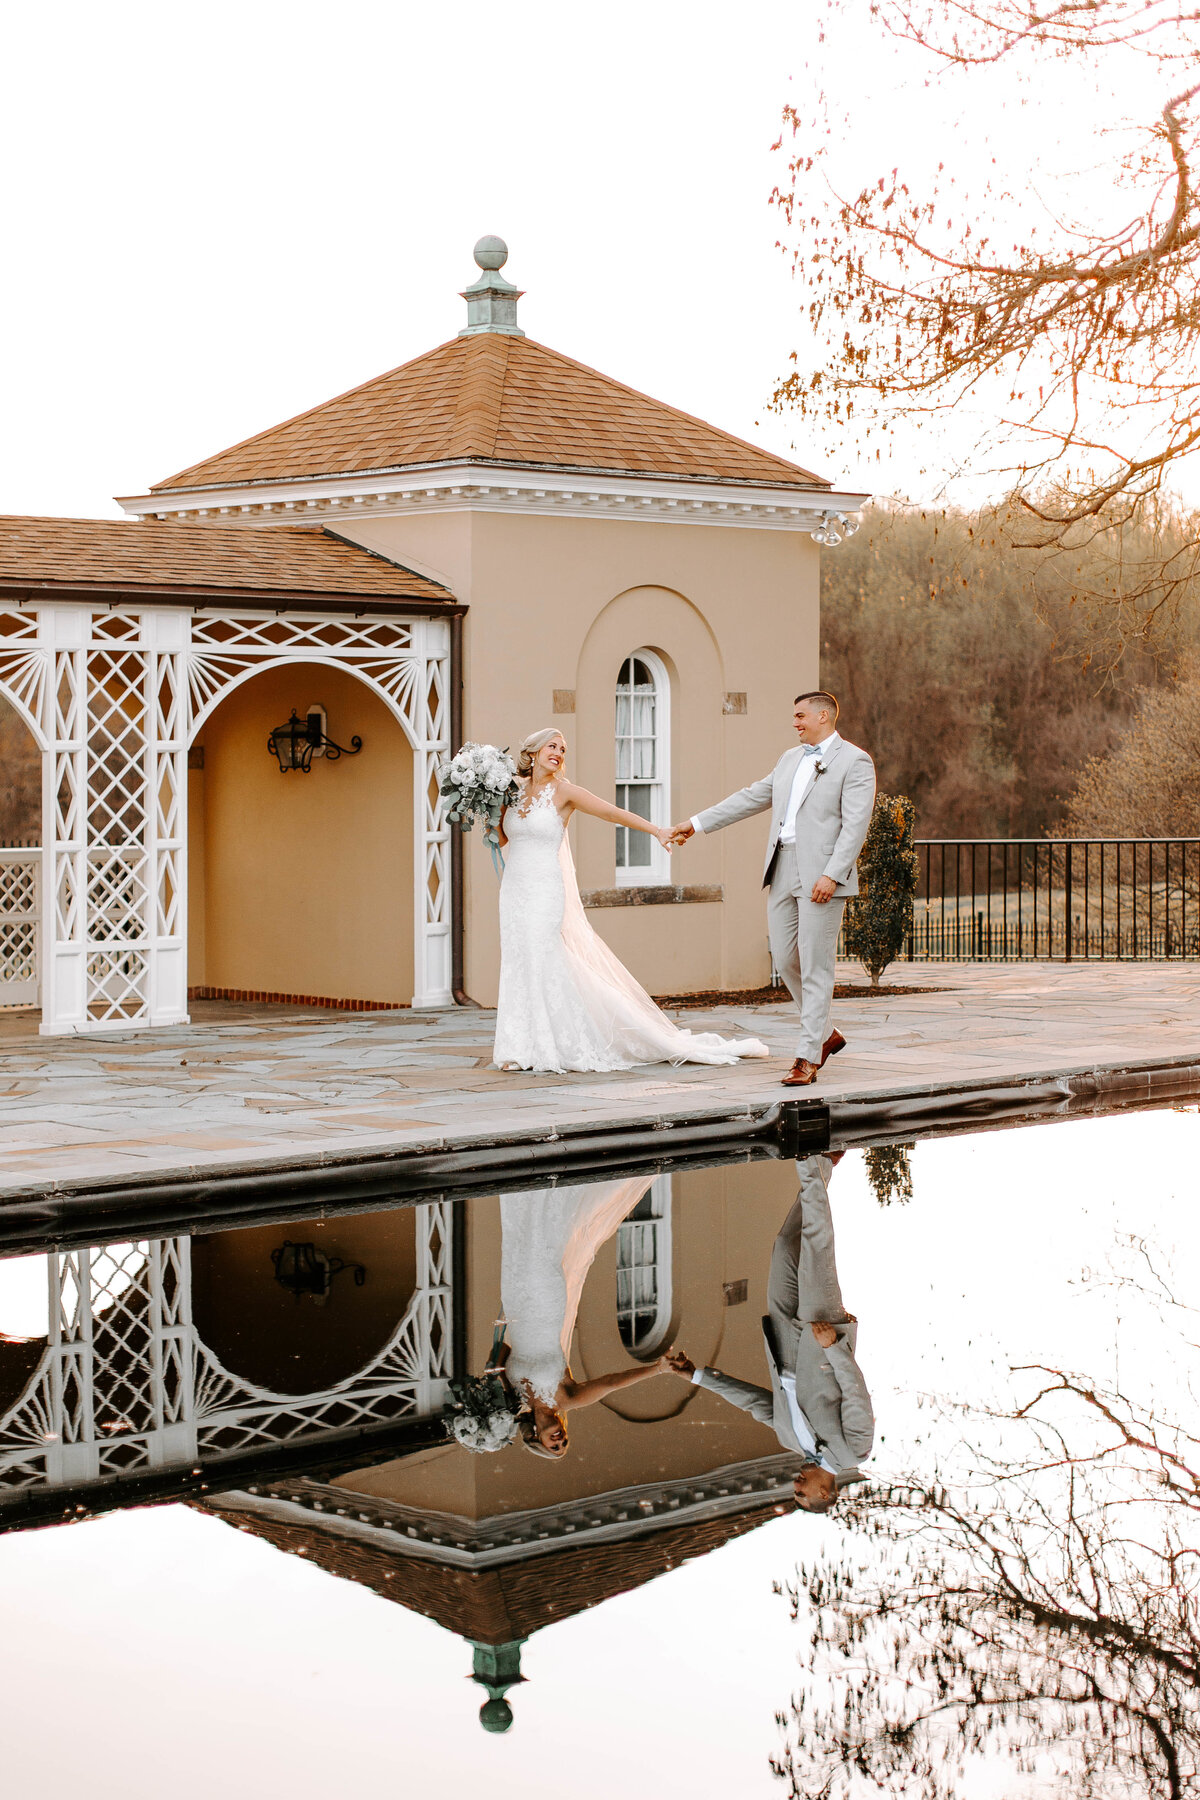 A bride and groom walk hand in hand in front of a beige building. There is a pool in front of them that perfectly reflects the image